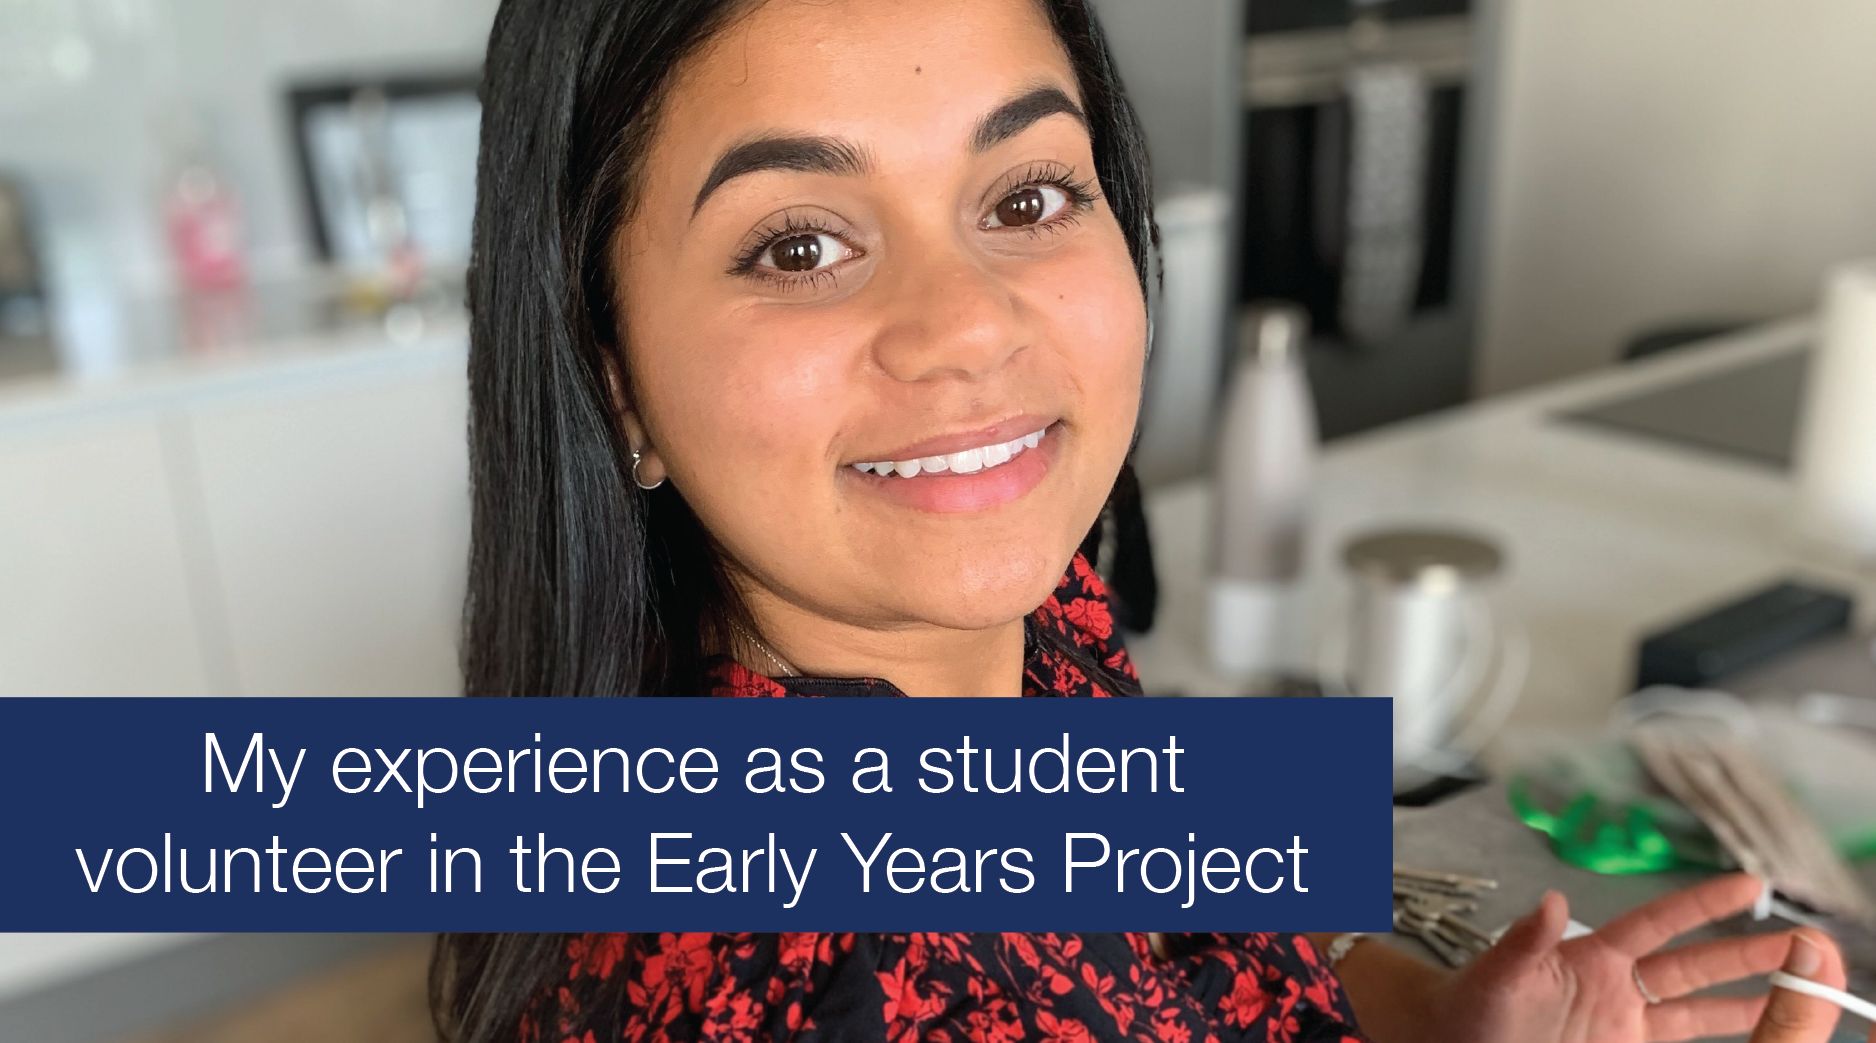 Tara Patel, My experience as a student volunteer in the Early Years Project